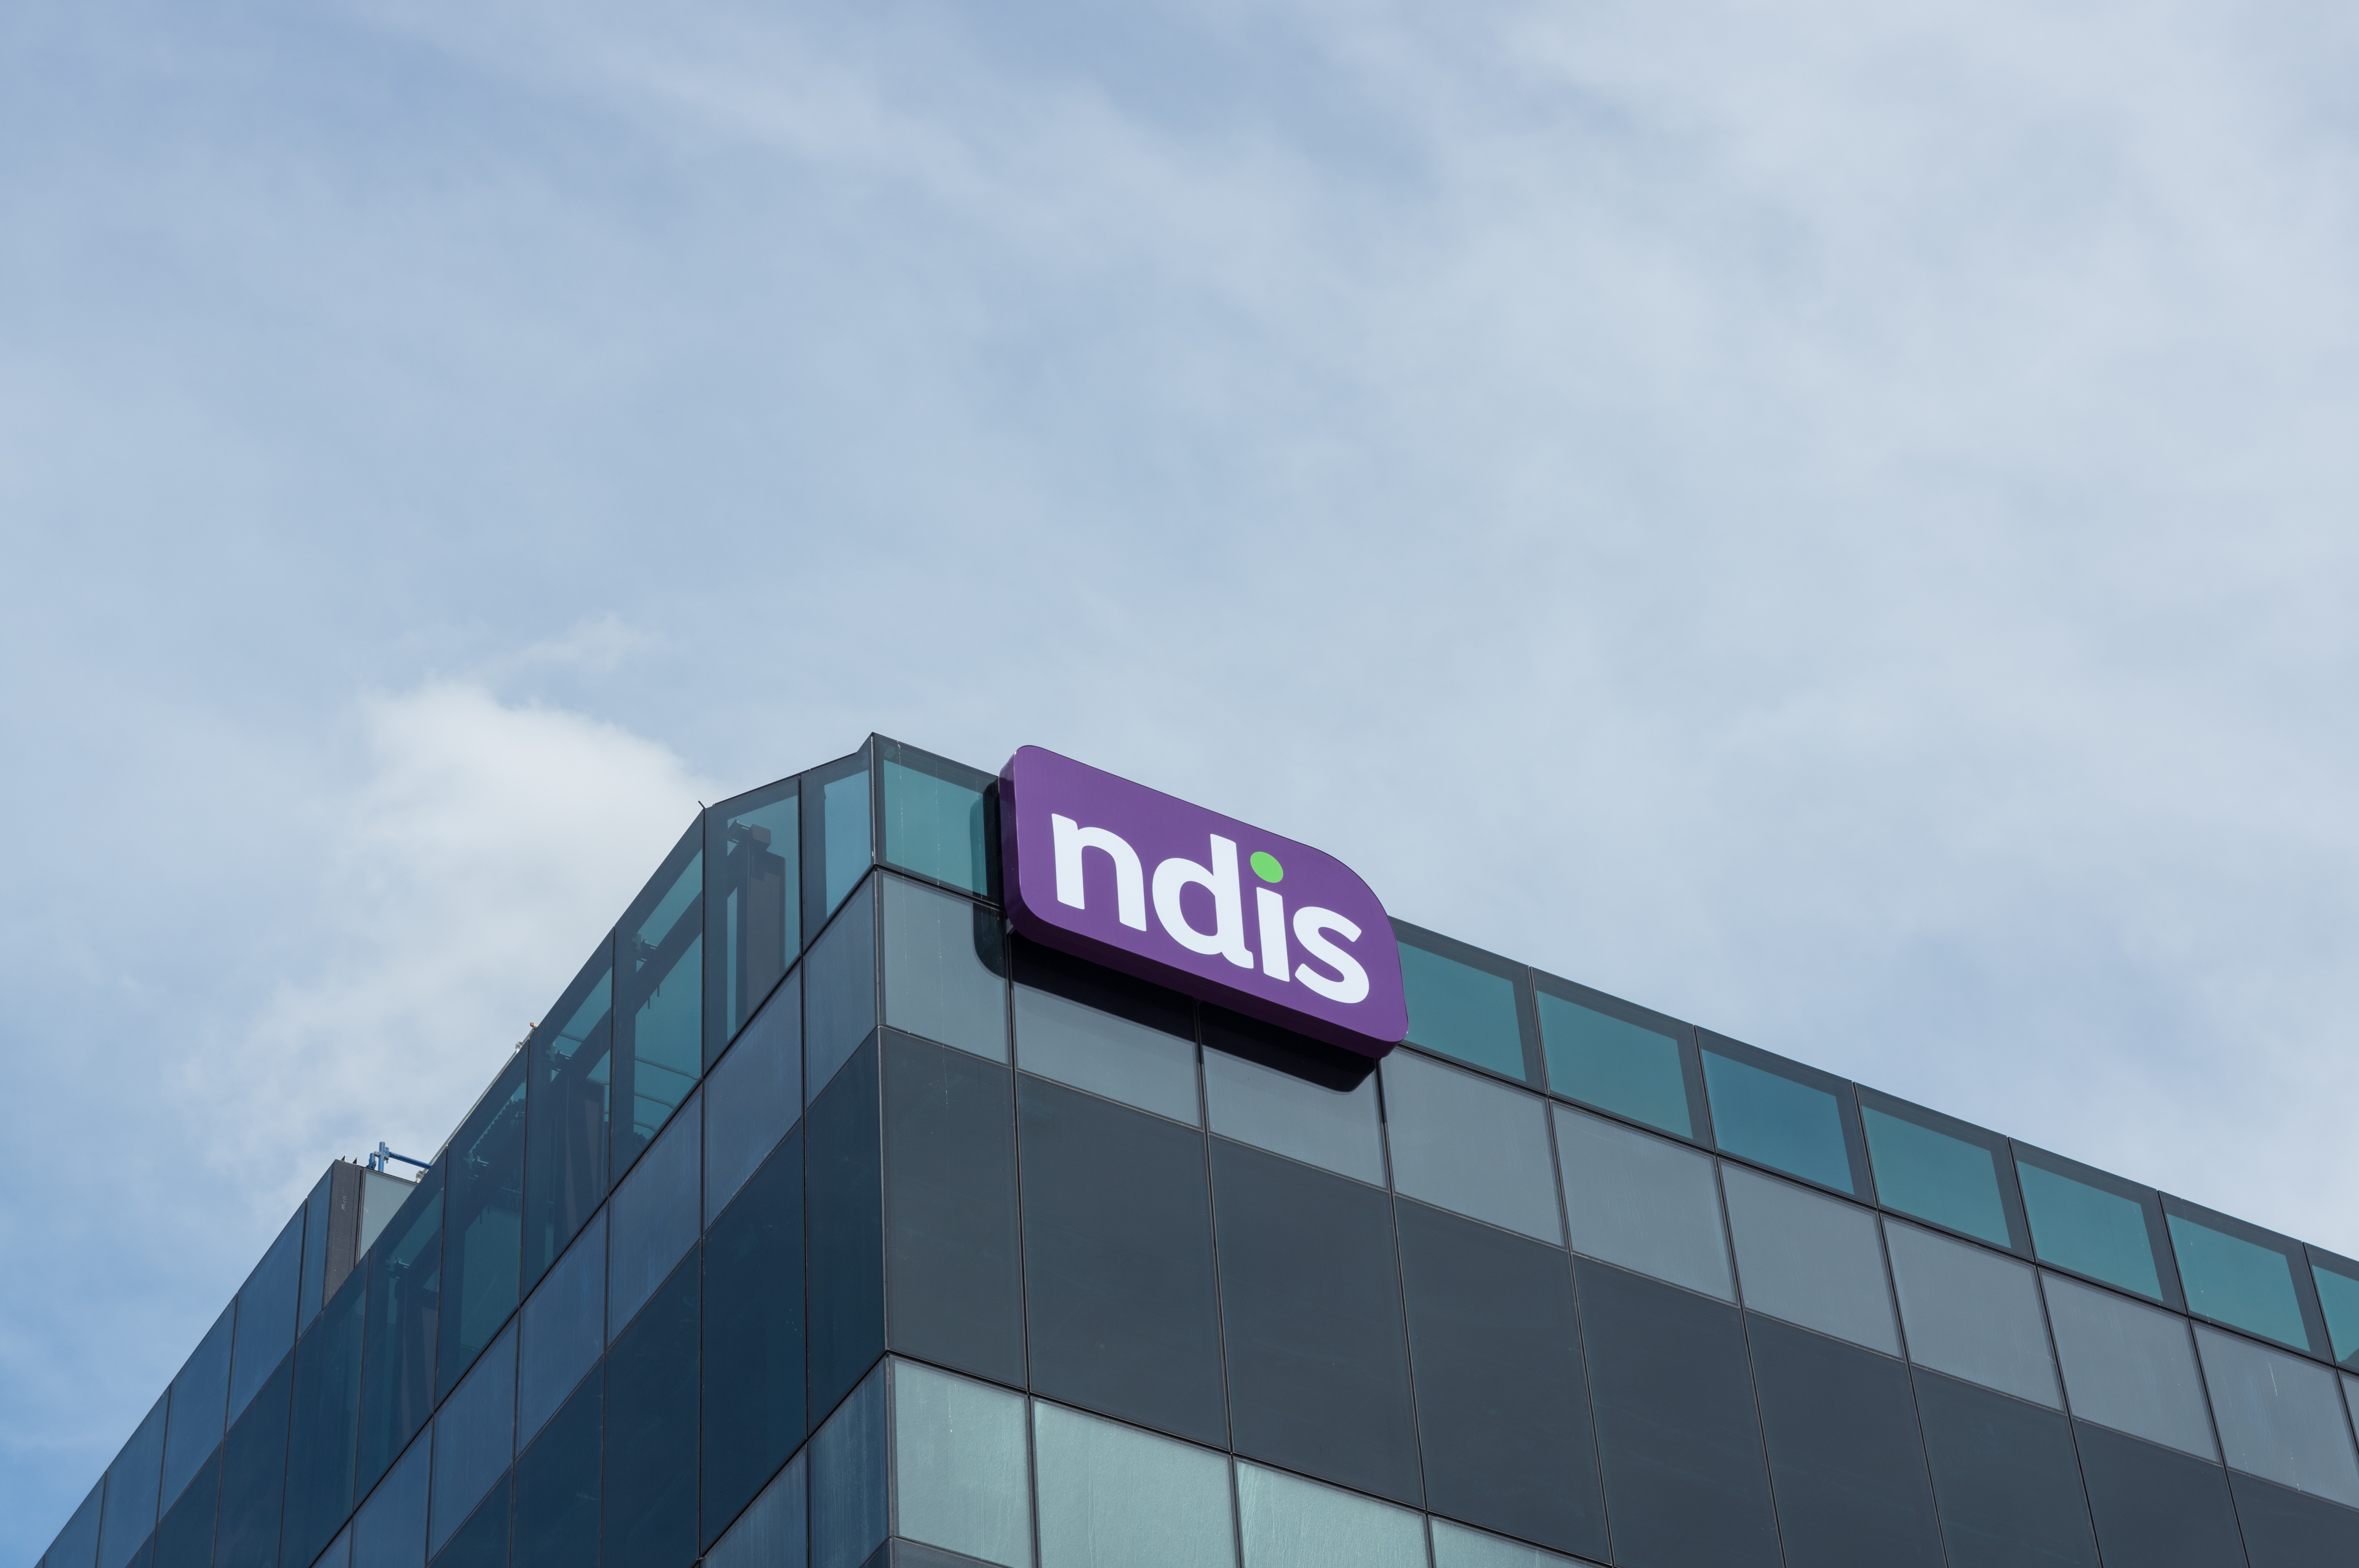 The top of a glass building with an NDIS logo